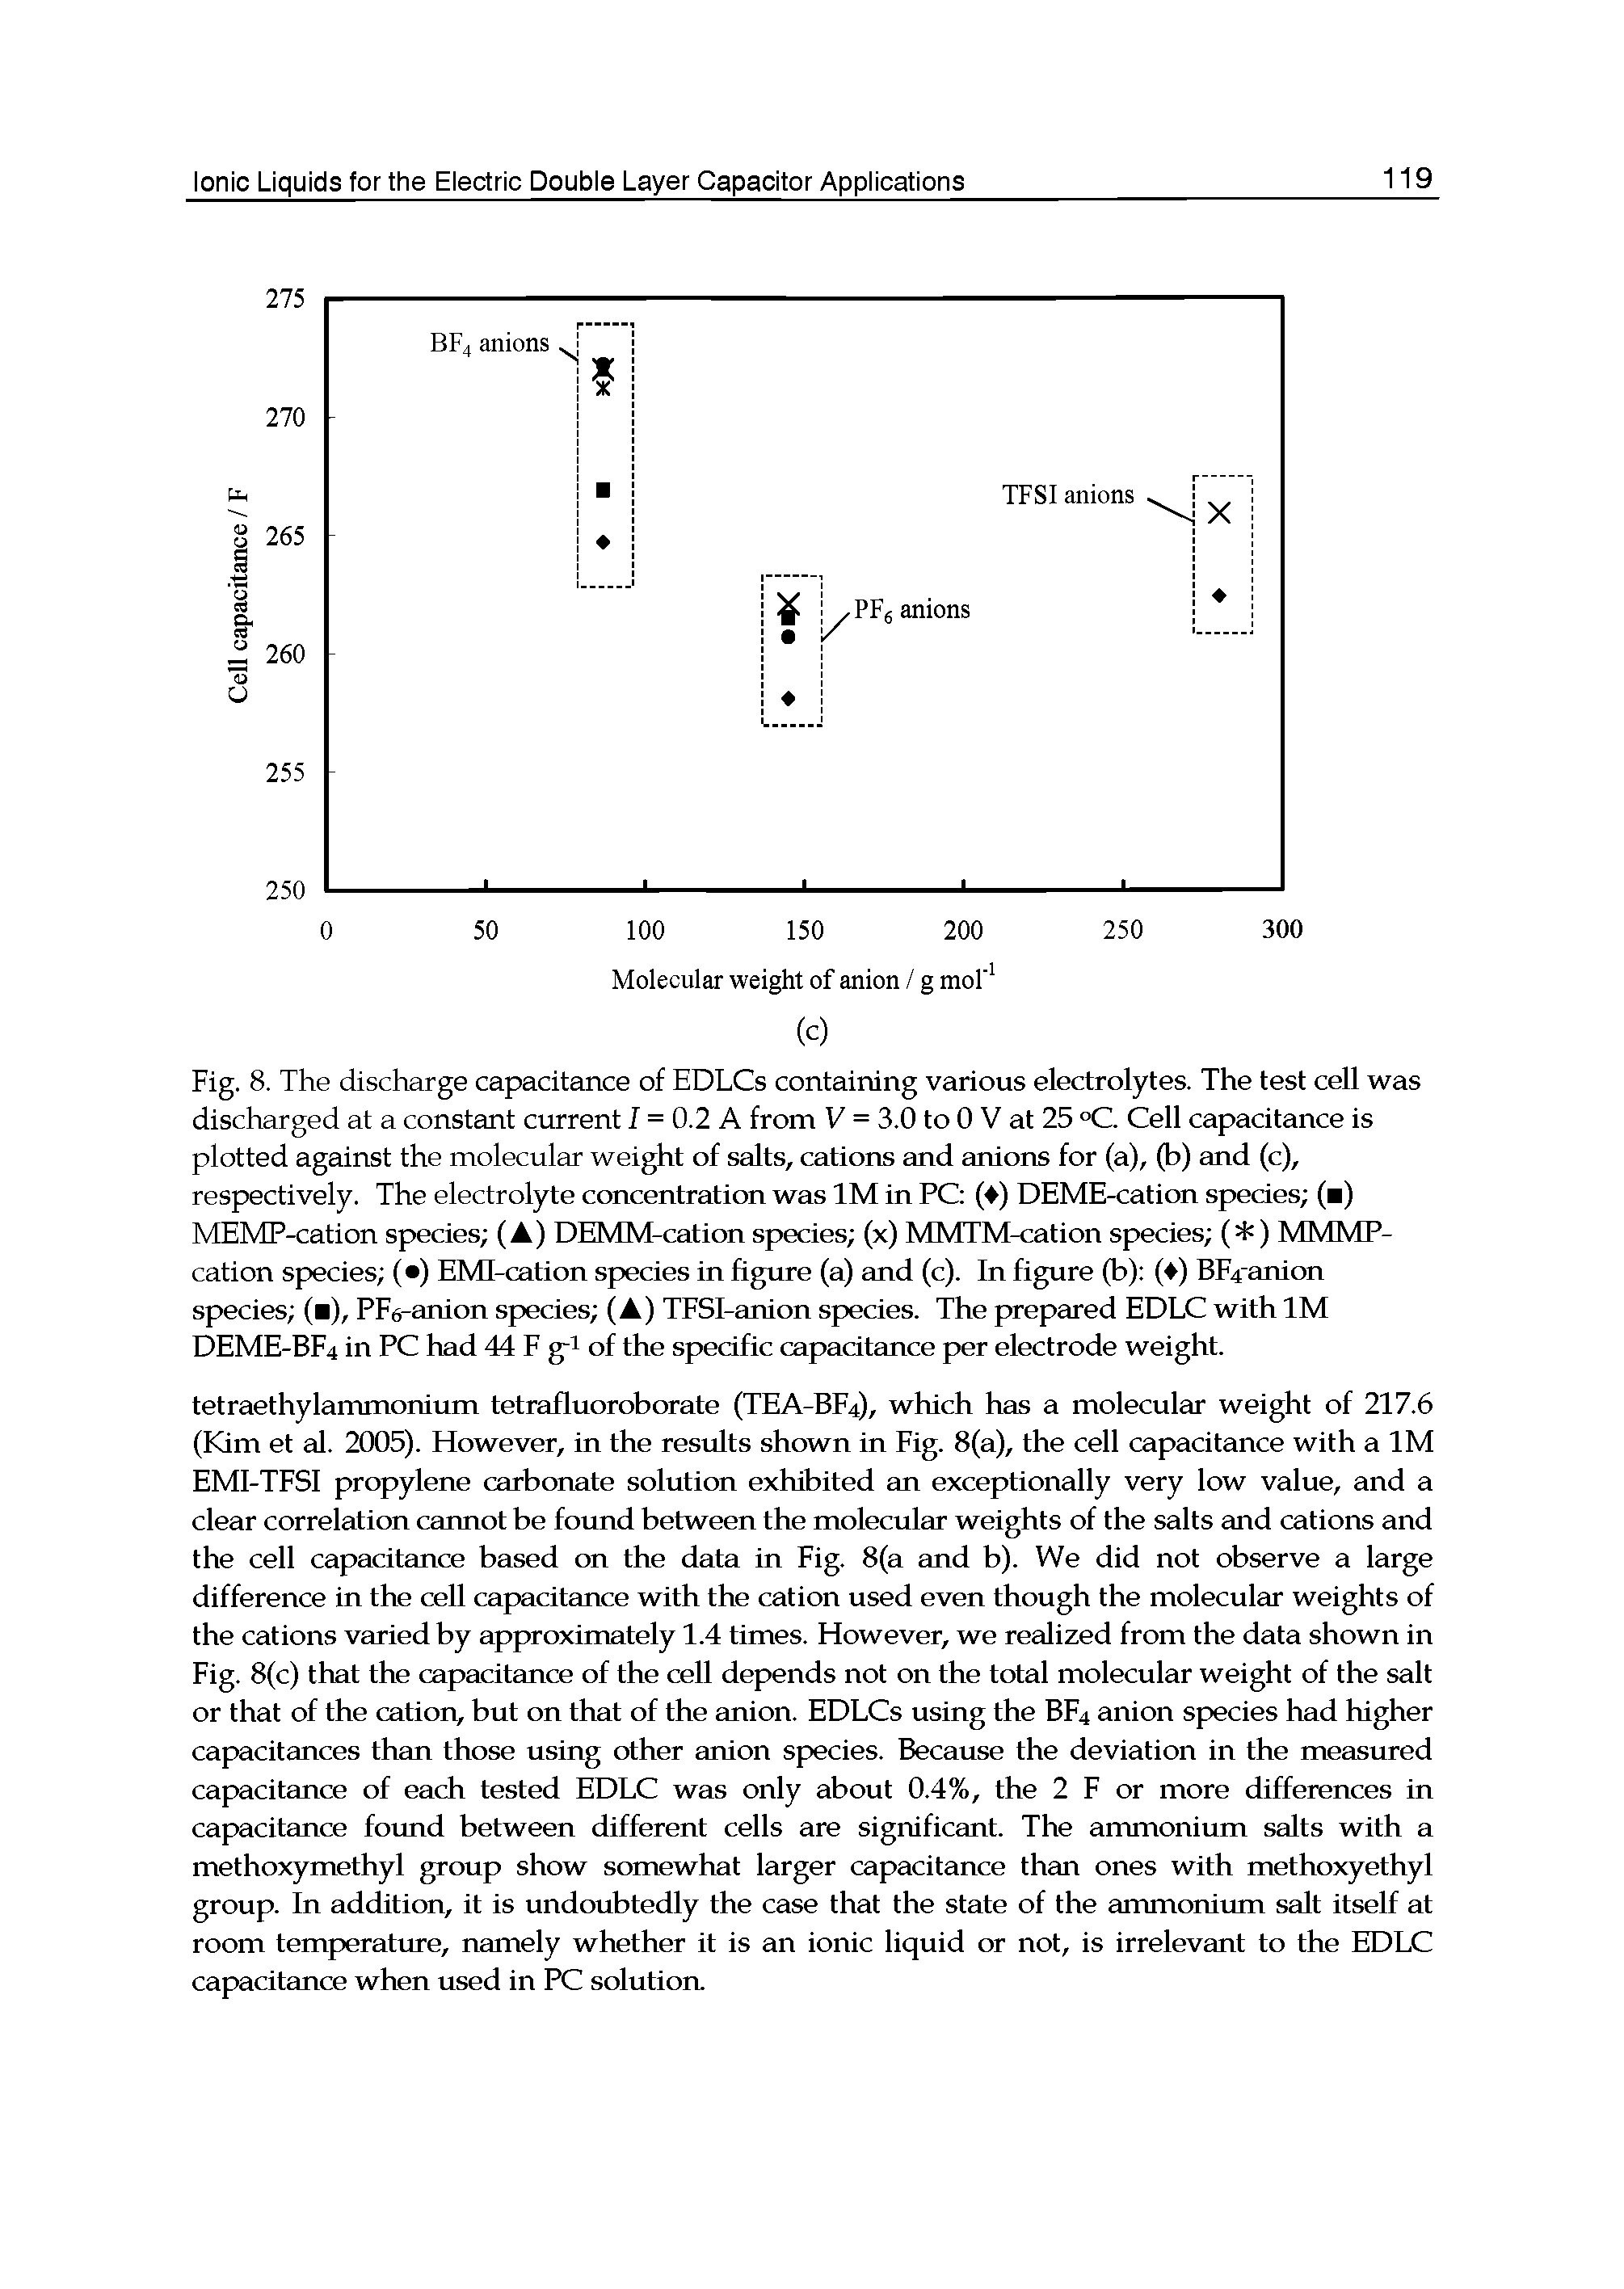 Fig. 8. The discharge capacitance of EDLCs containing various electrolytes. The test cell was discharged at a constant current I = 0.2 A from V = 3.0 to 0 V at 25 °C. Cell capacitance is plotted against the molecular weight of salts, cations and anions for (a), (b) and (c), respectively. The electrolyte concentration was IM in PG ( ) DEME-cation sp>ecies ( ) MEMP-cation species (A) DEMM-cation sp>ecies (x) MMTM-cation species ( ) MMMP-cation species ( ) EMI-cation species in figure (a) and (c). In figure (b) ( ) BFfanion species ( ), PFe-anion species (A) TFSI-anion species. The ptrepared EDLC with IM DEME-BF4 in PC had 44 F g-i of the sp>ecific cap>acitance p>er electrode weight.